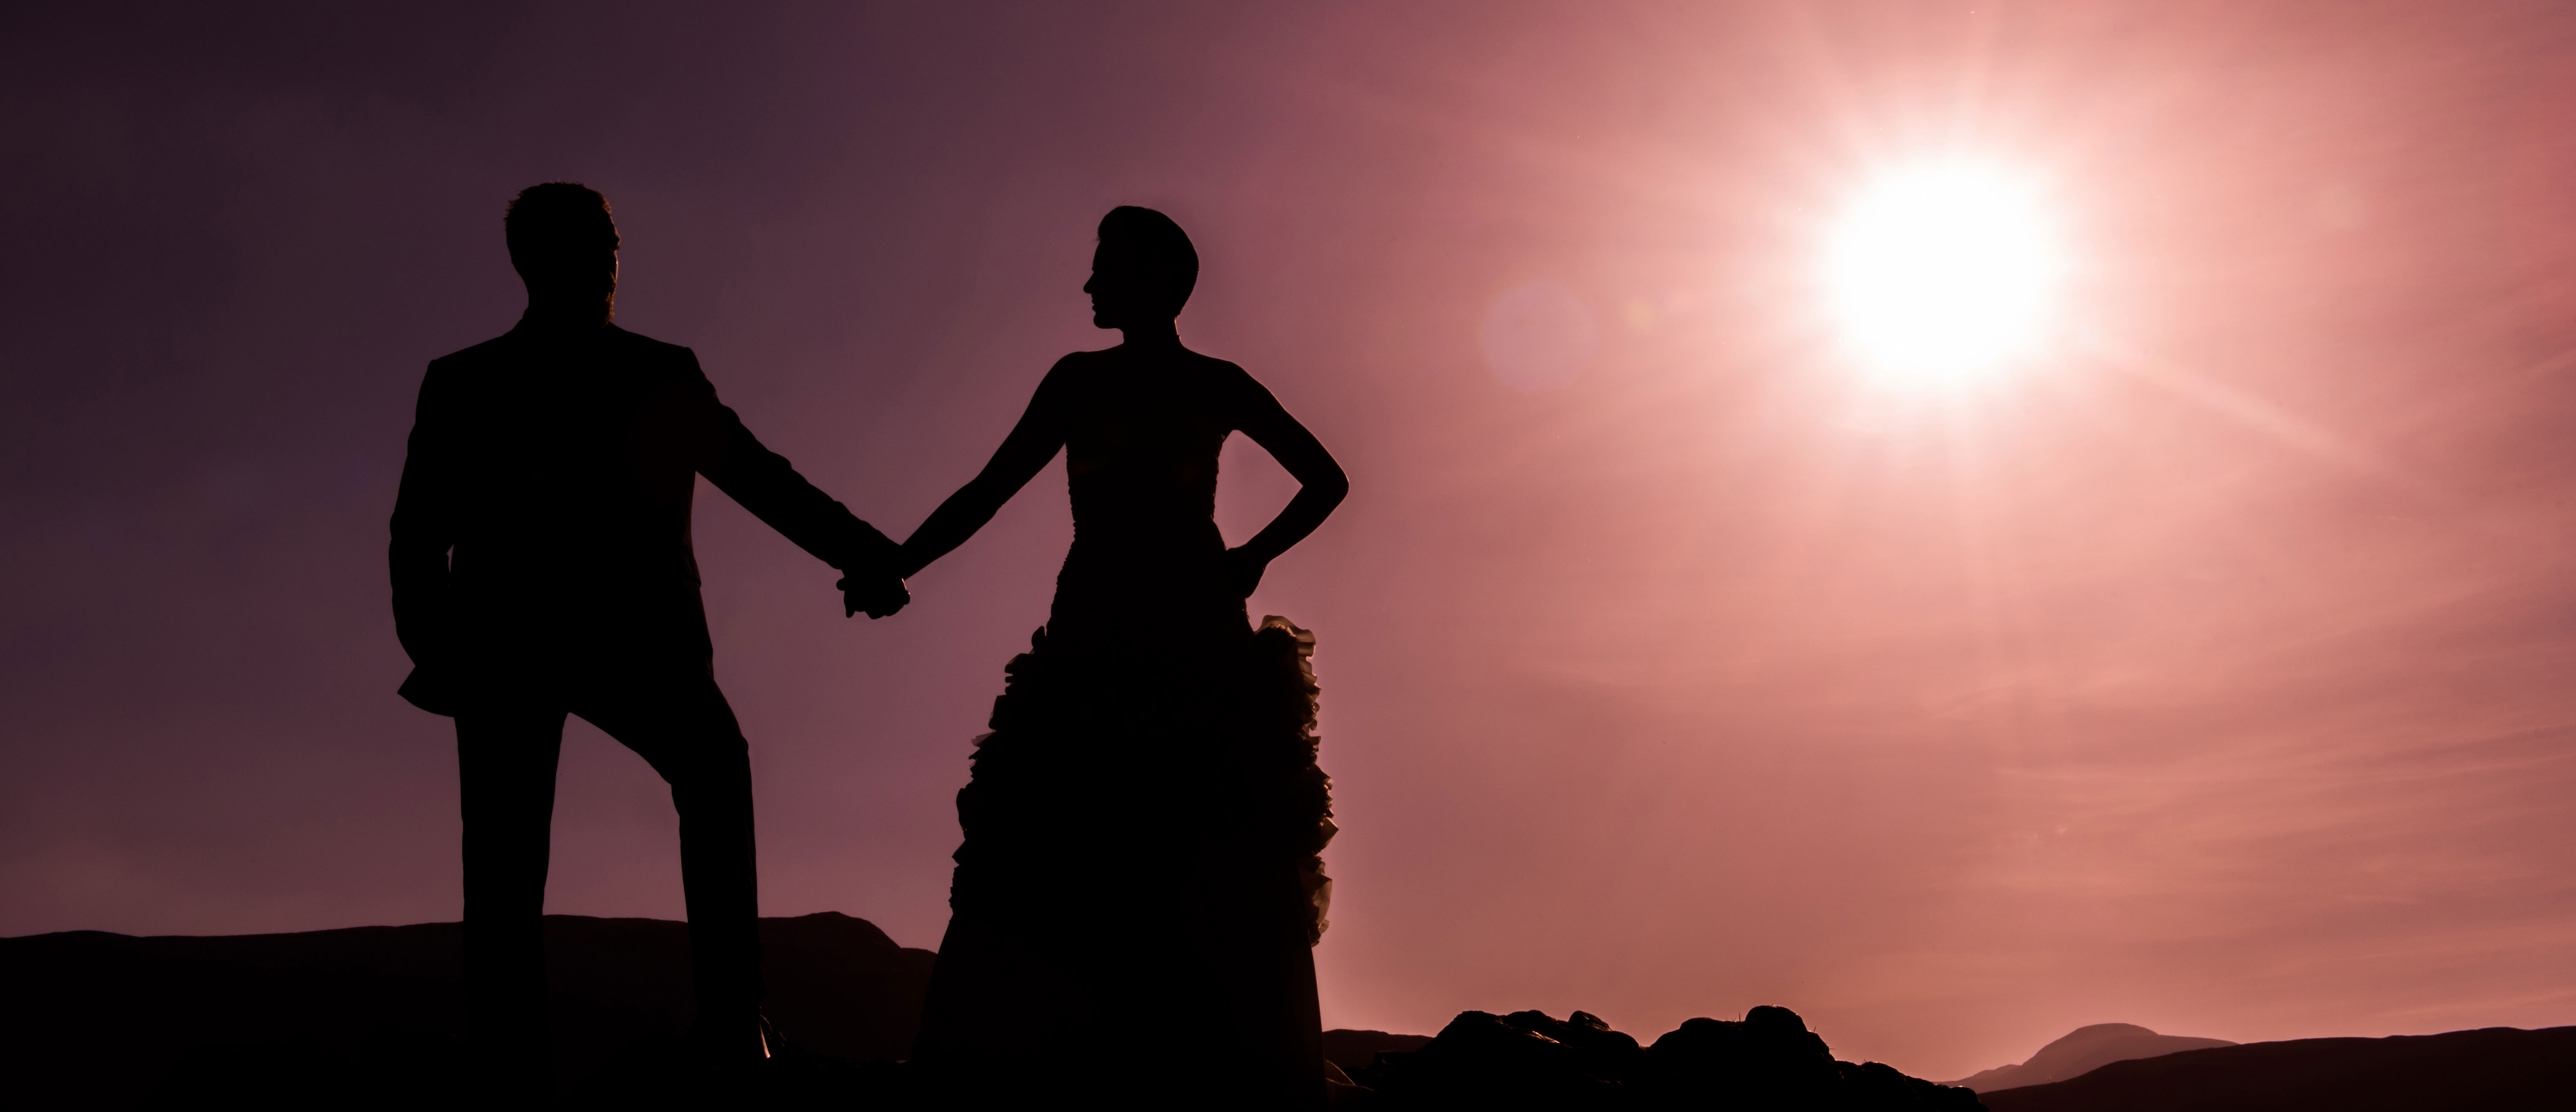 Sheffield wedding photography sunset sky bride and groom holding hands silhouettes